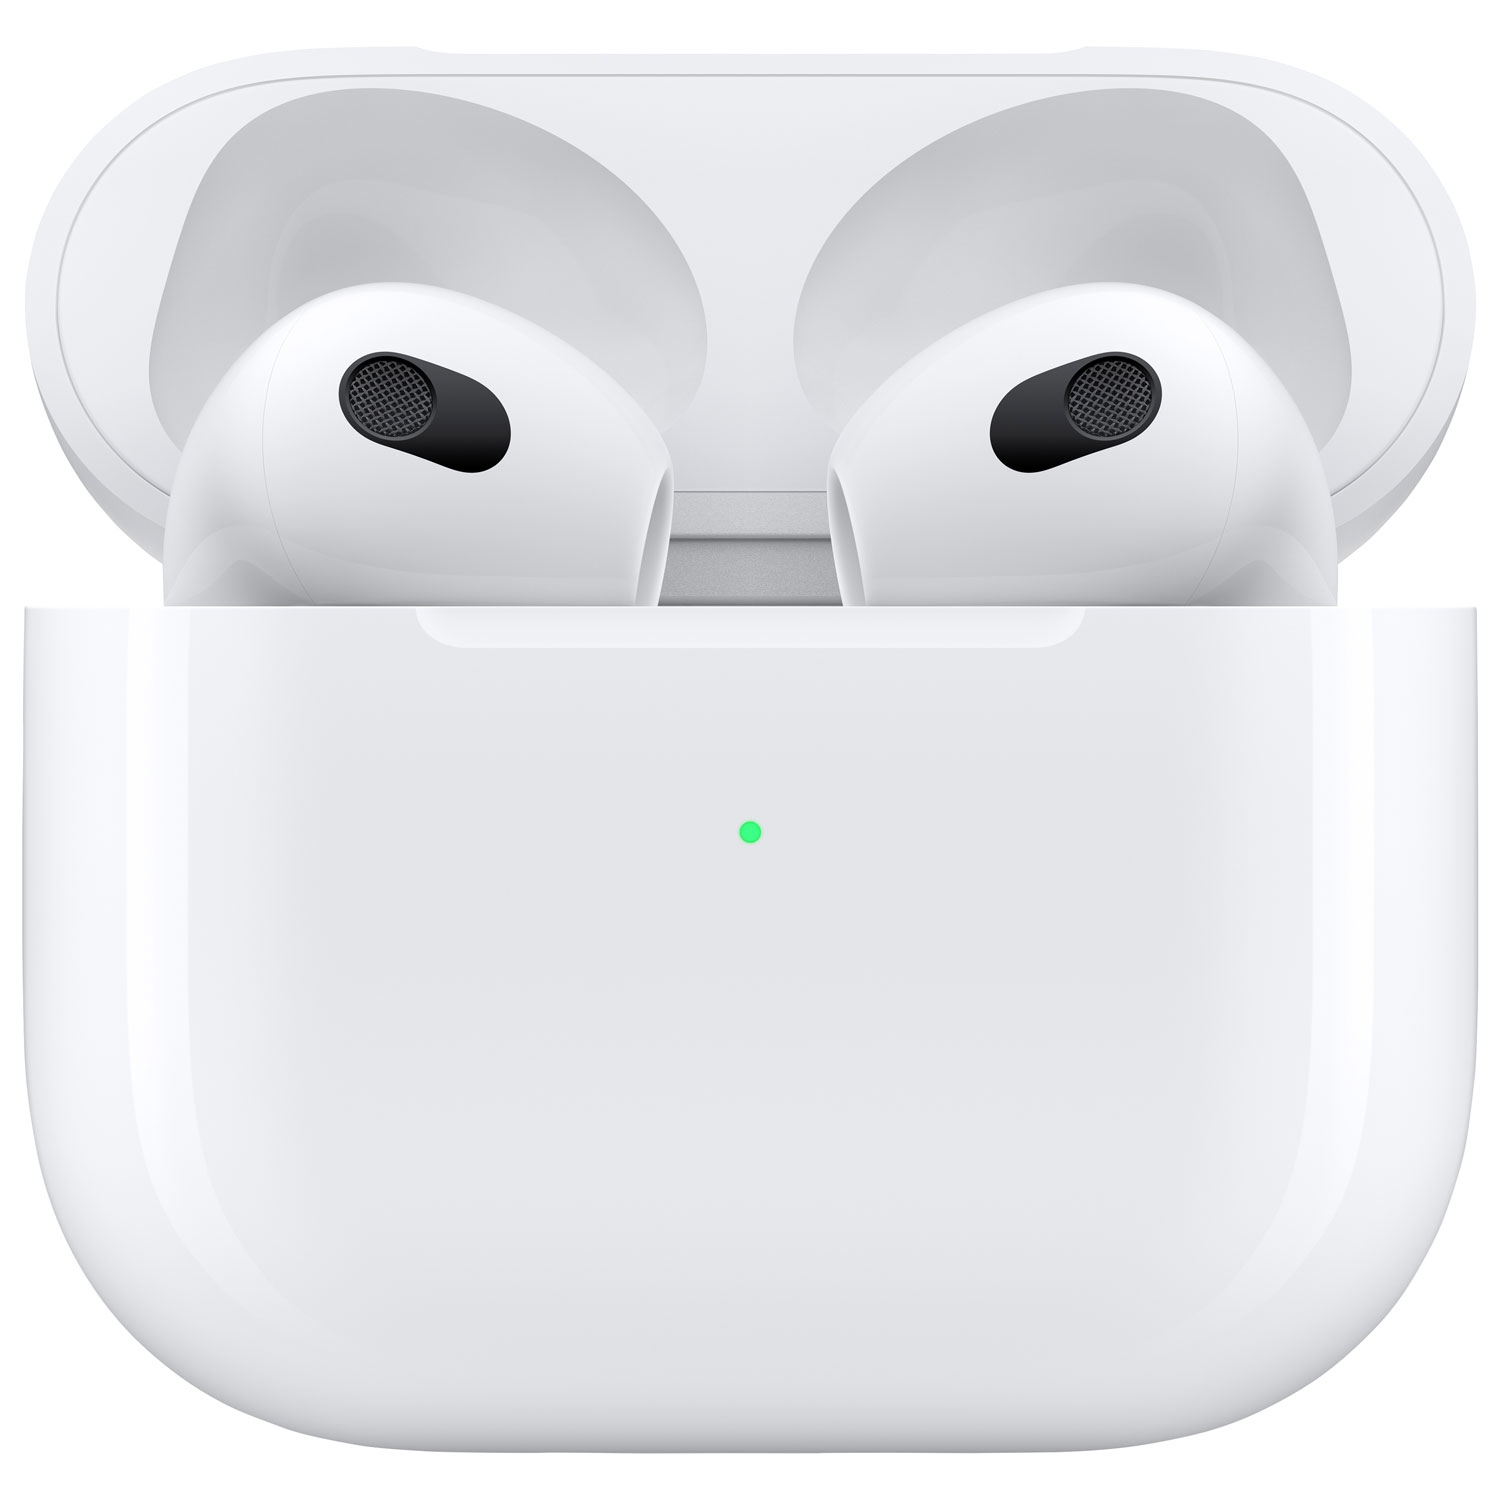 Refurbished (Fair) - Apple AirPods In-Ear True Wireless Earbuds (3rd Generation) with MagSafe Charging Case - White